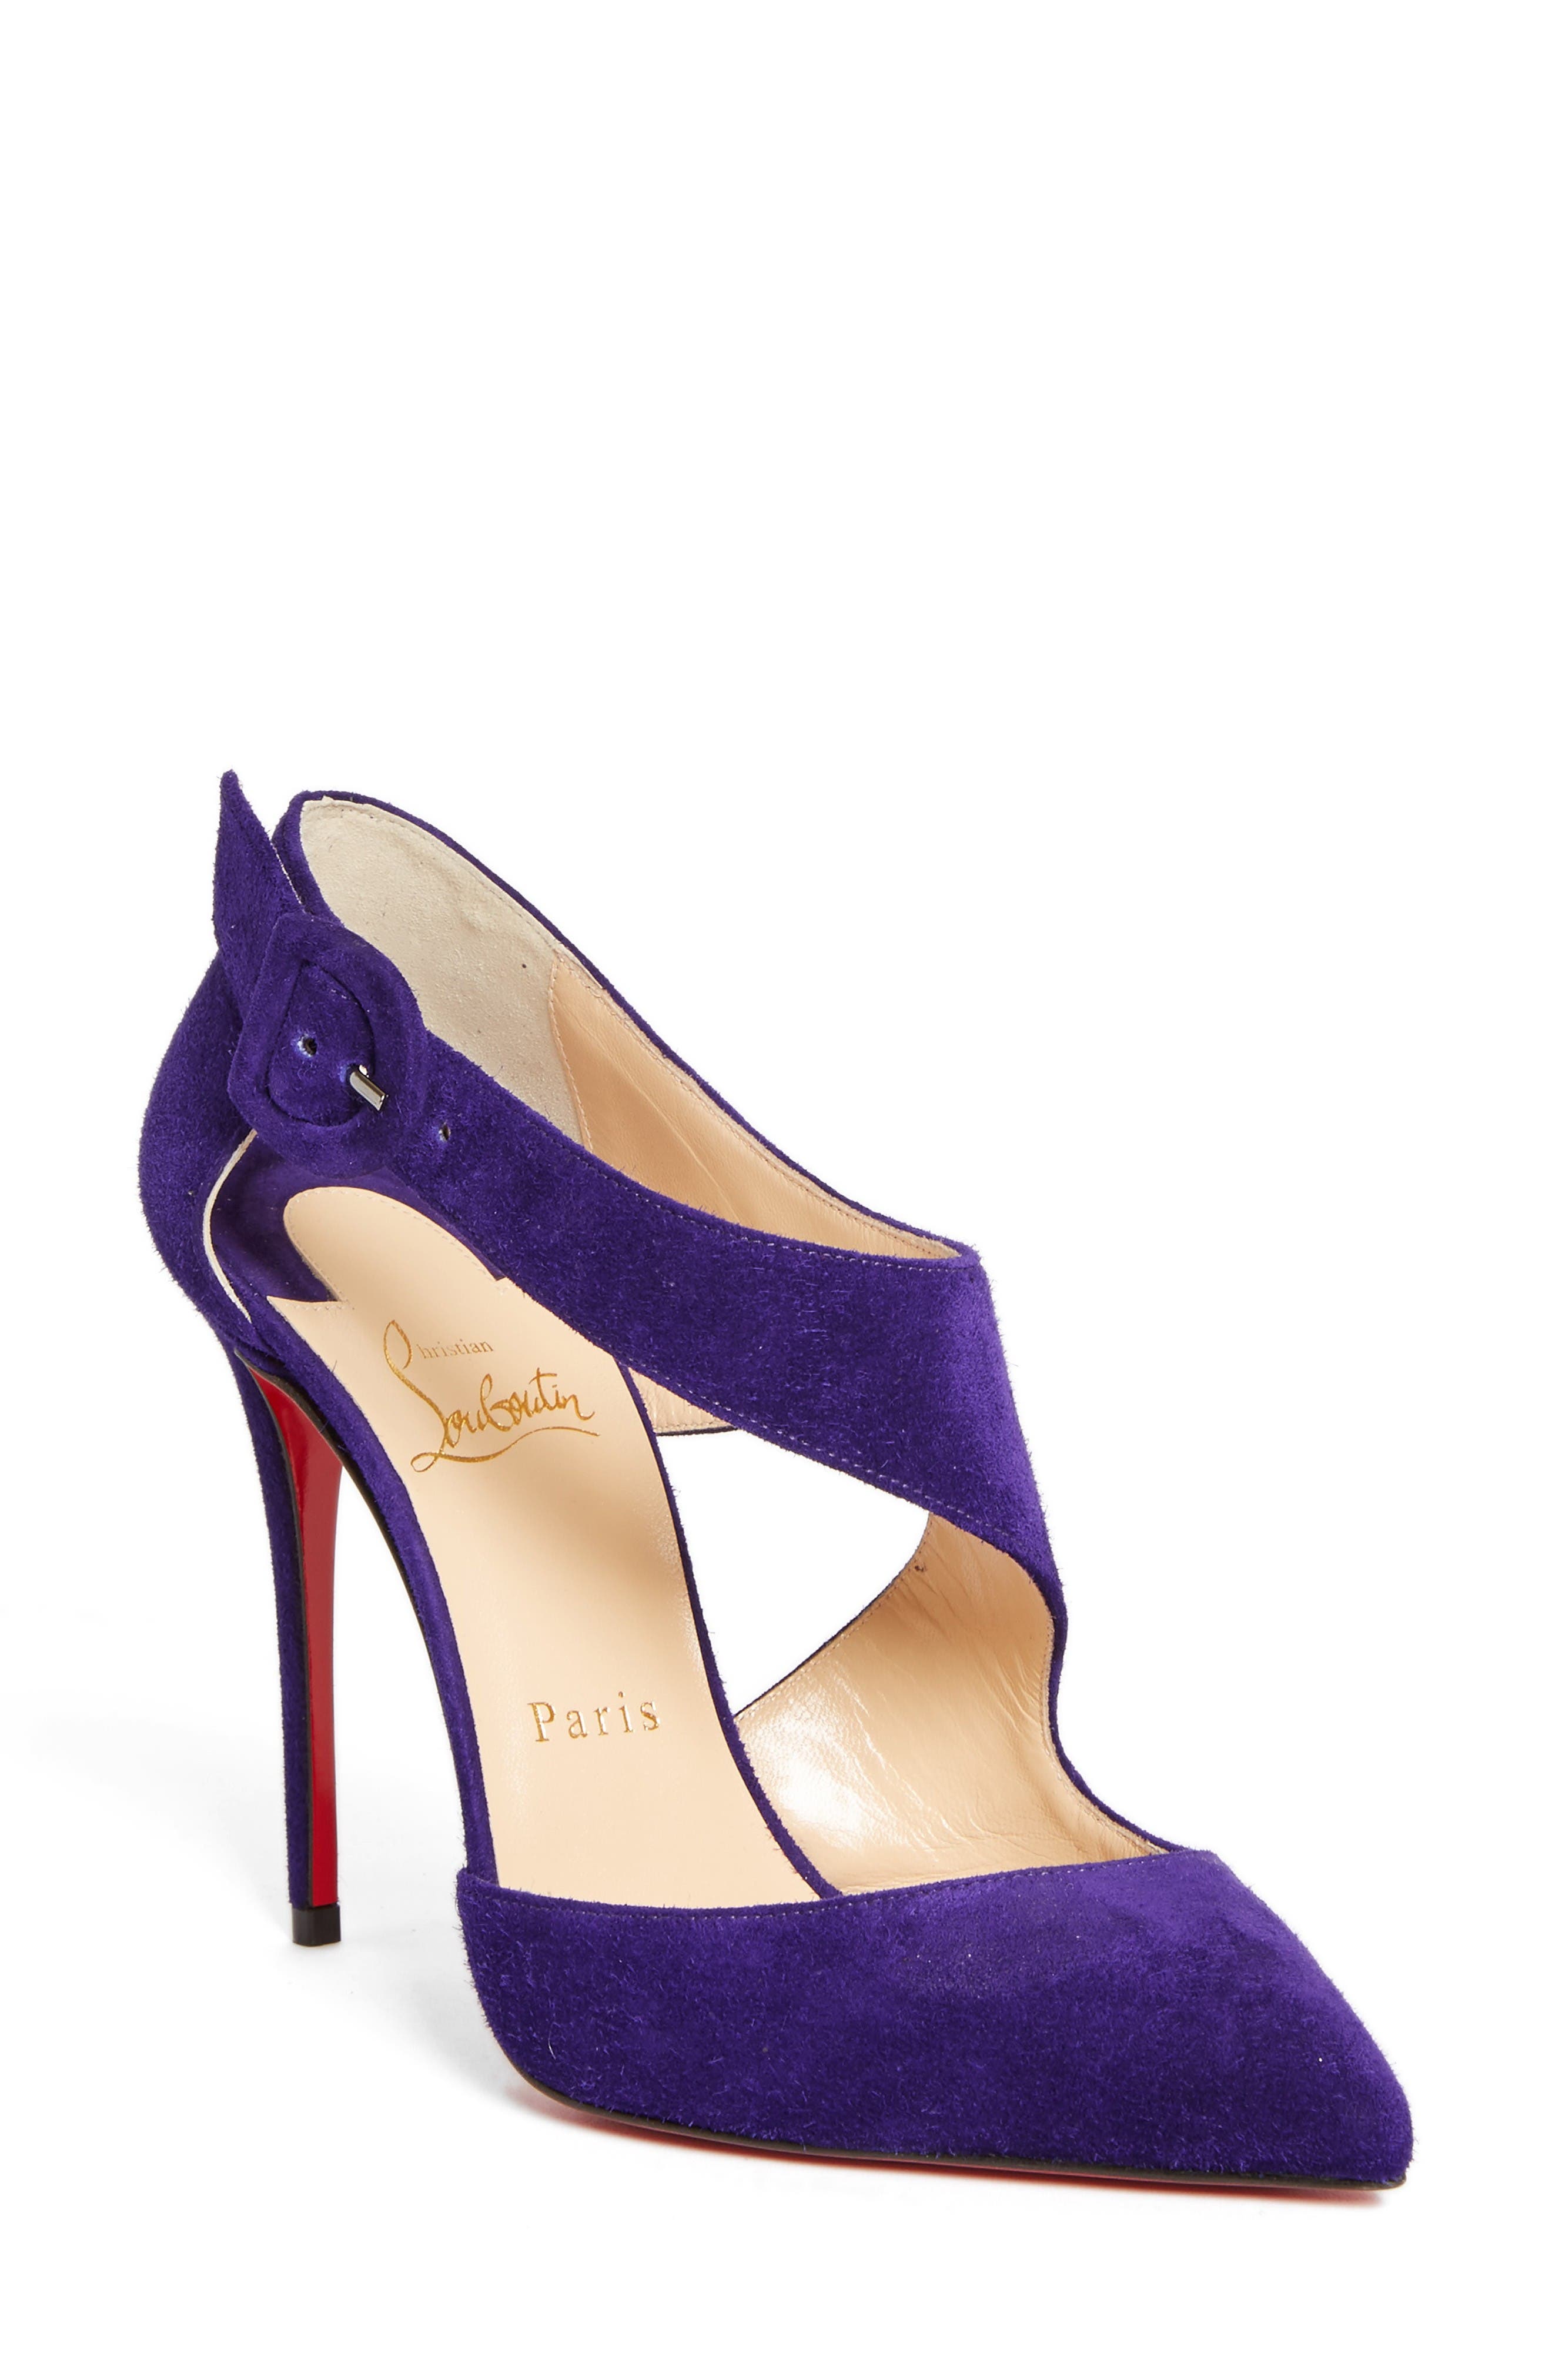 nordstrom rack louboutin shoes